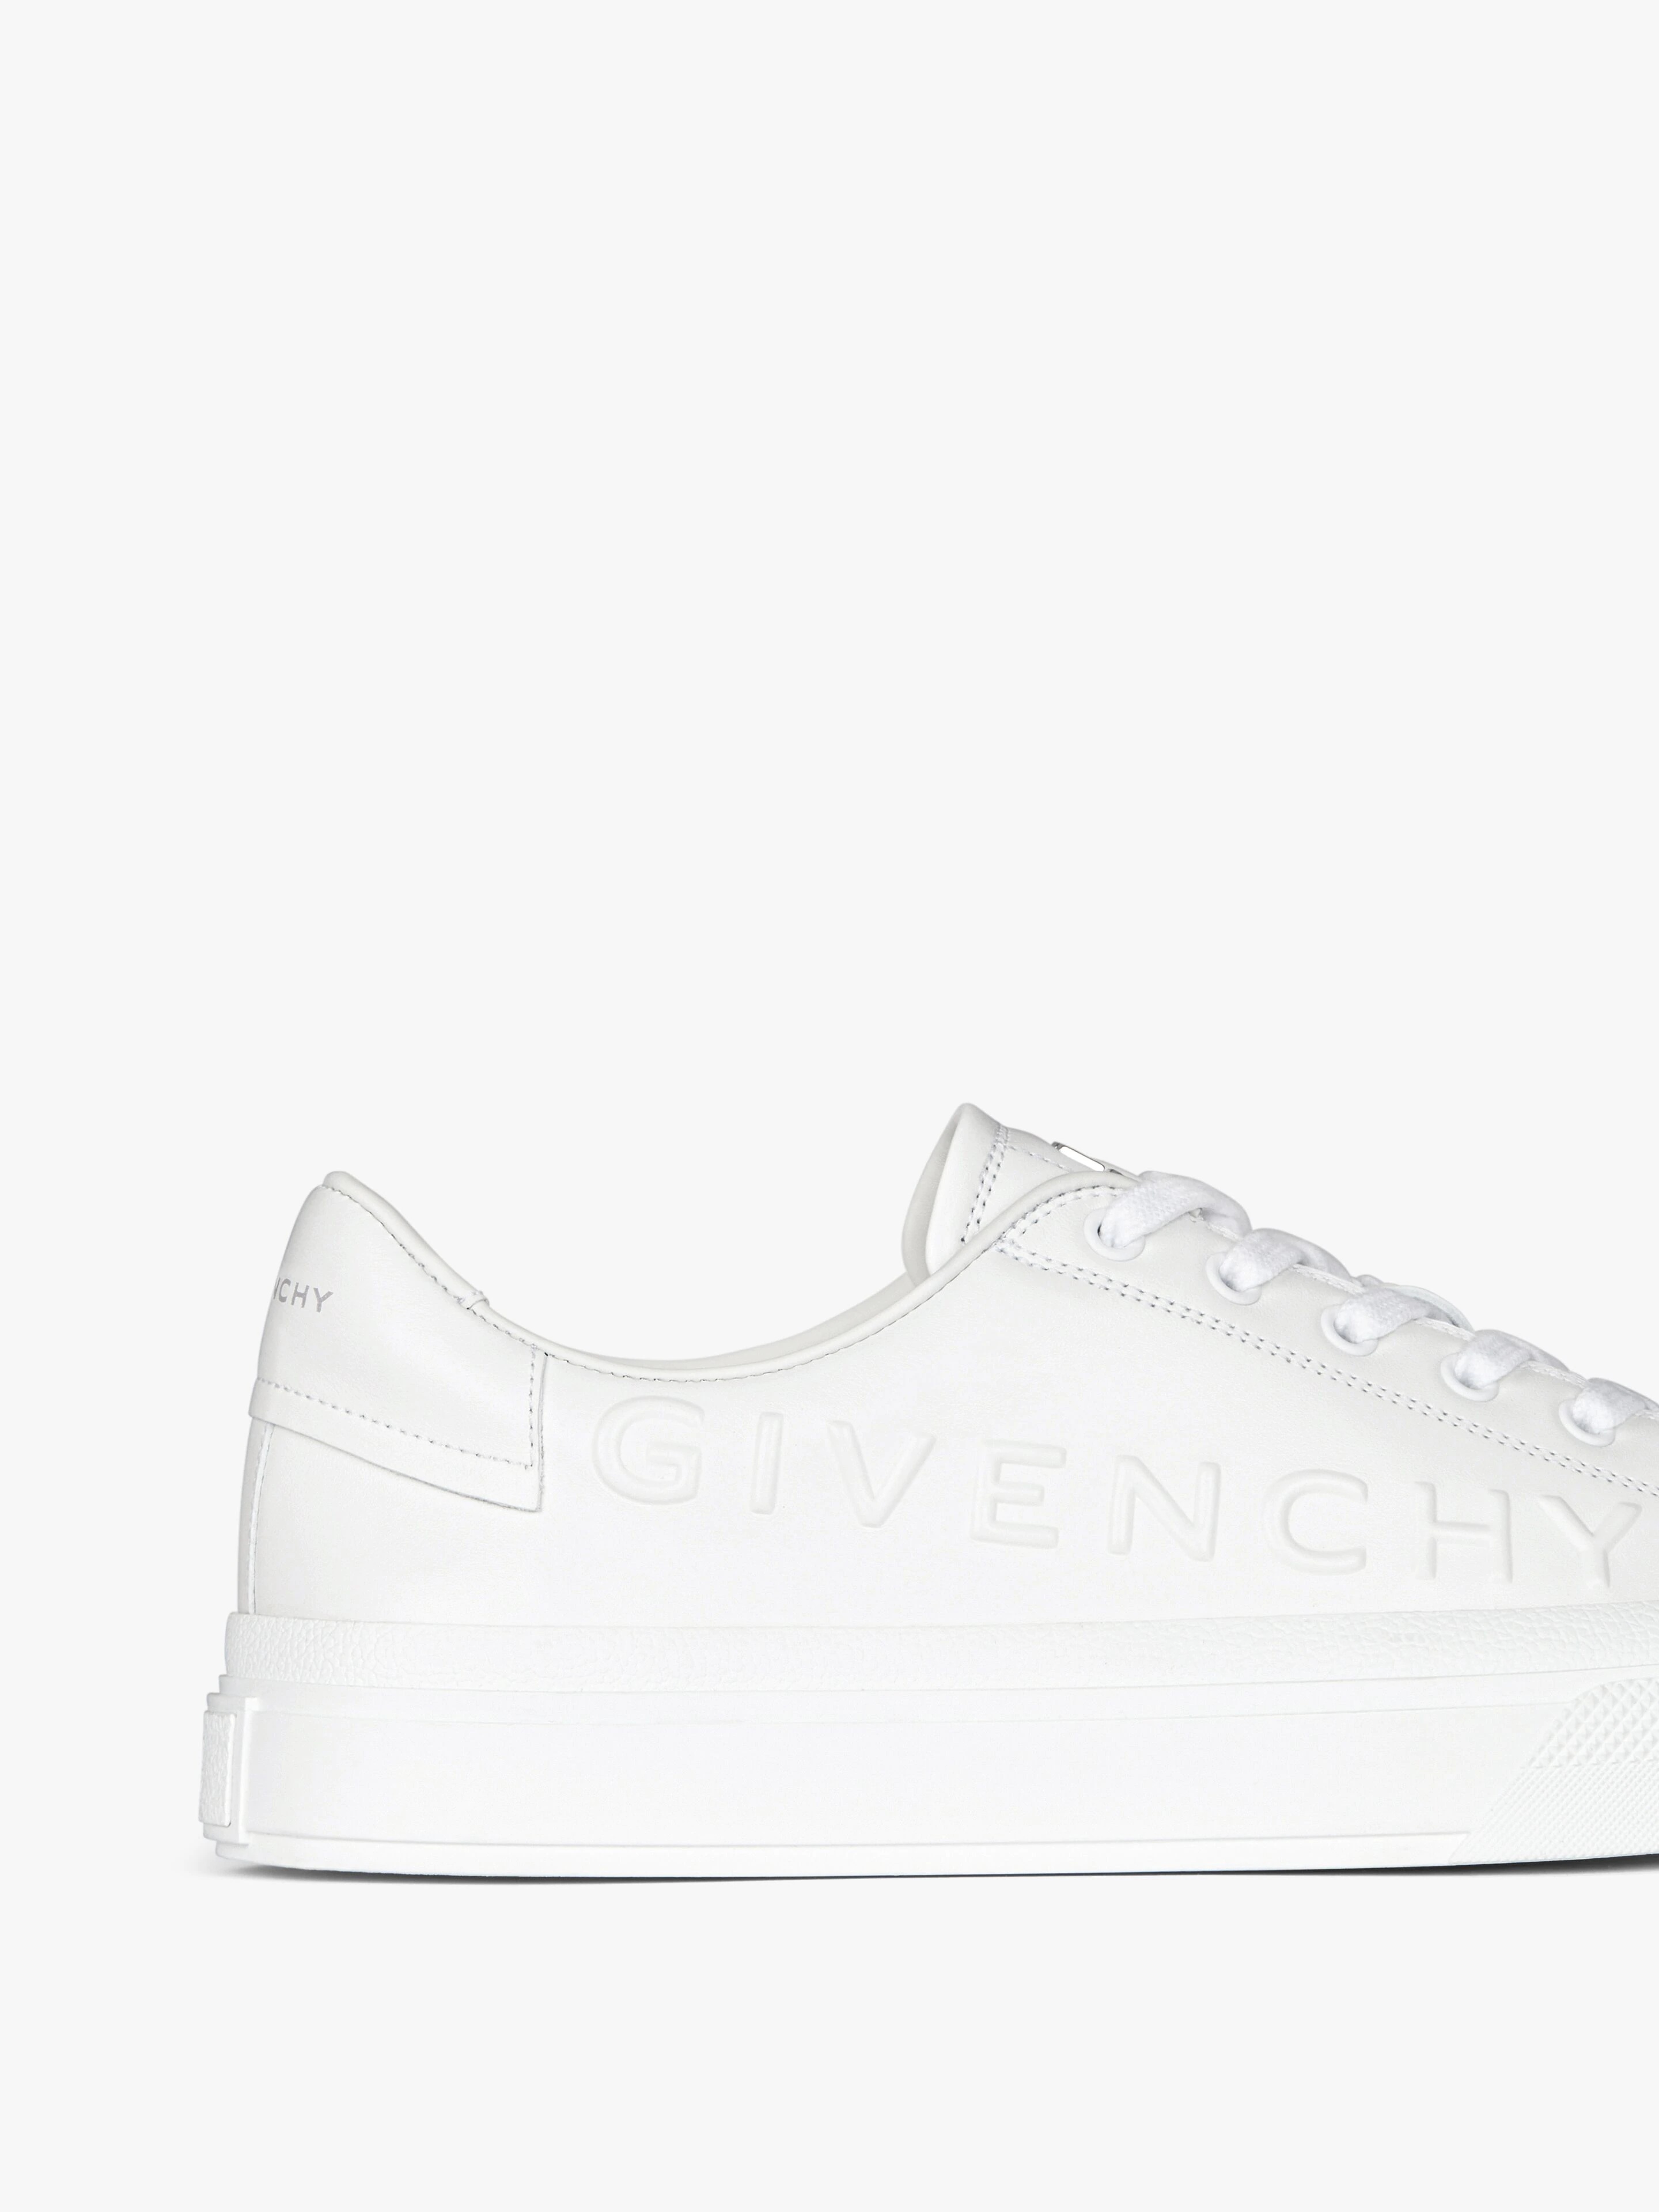 CITY SPORT SNEAKERS IN GIVENCHY LEATHER